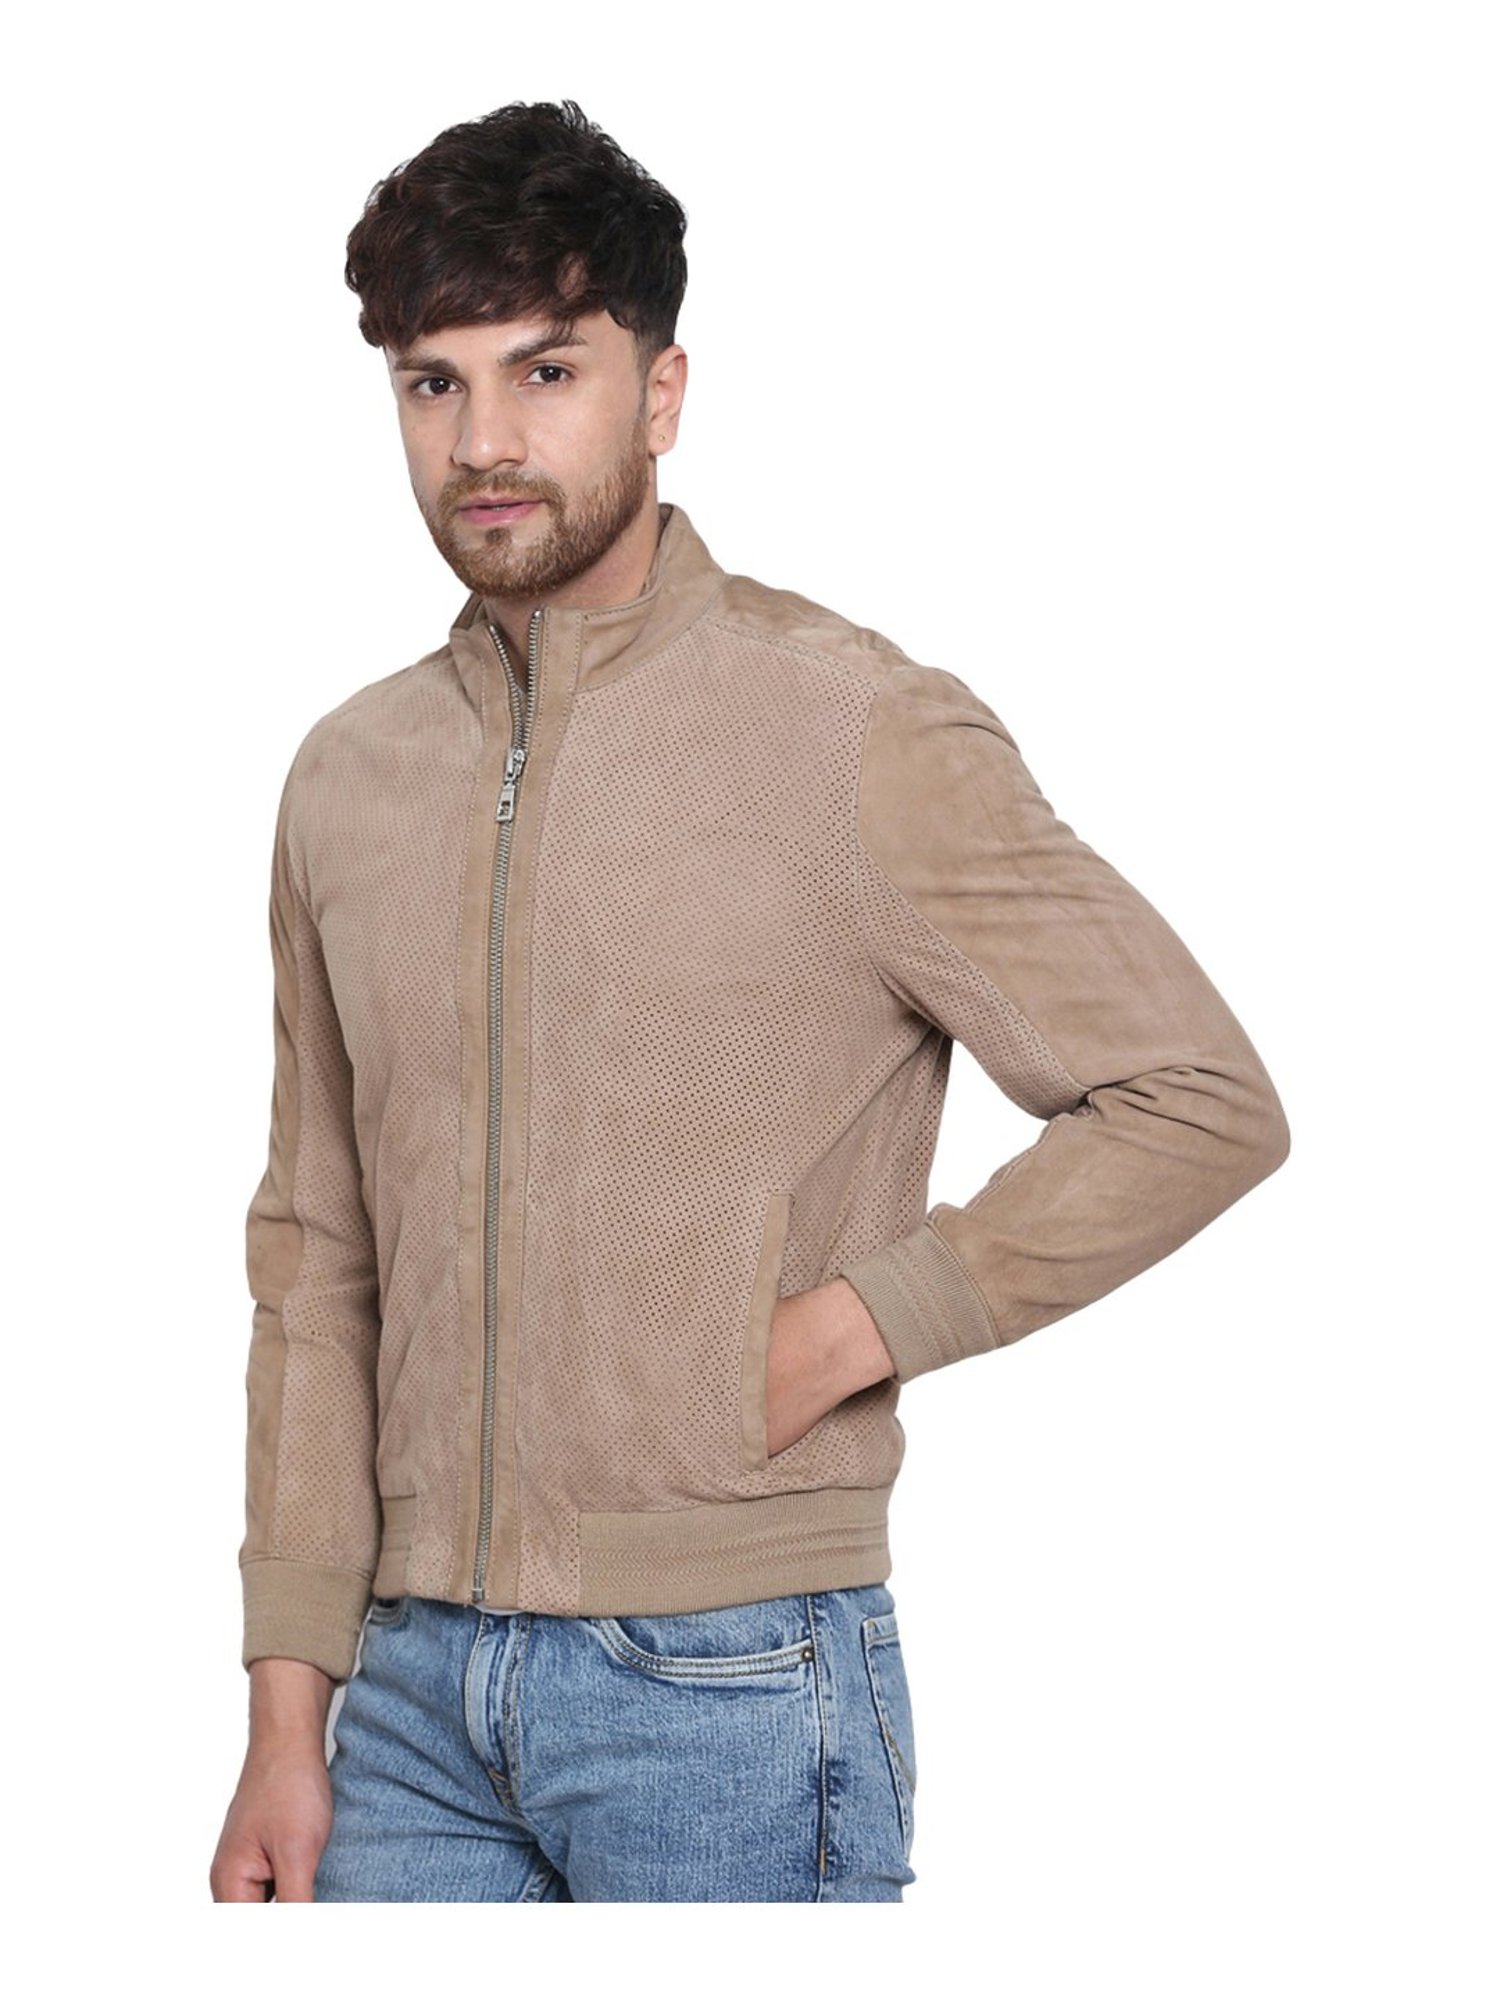 Justanned Tan Suede Leather Jackets